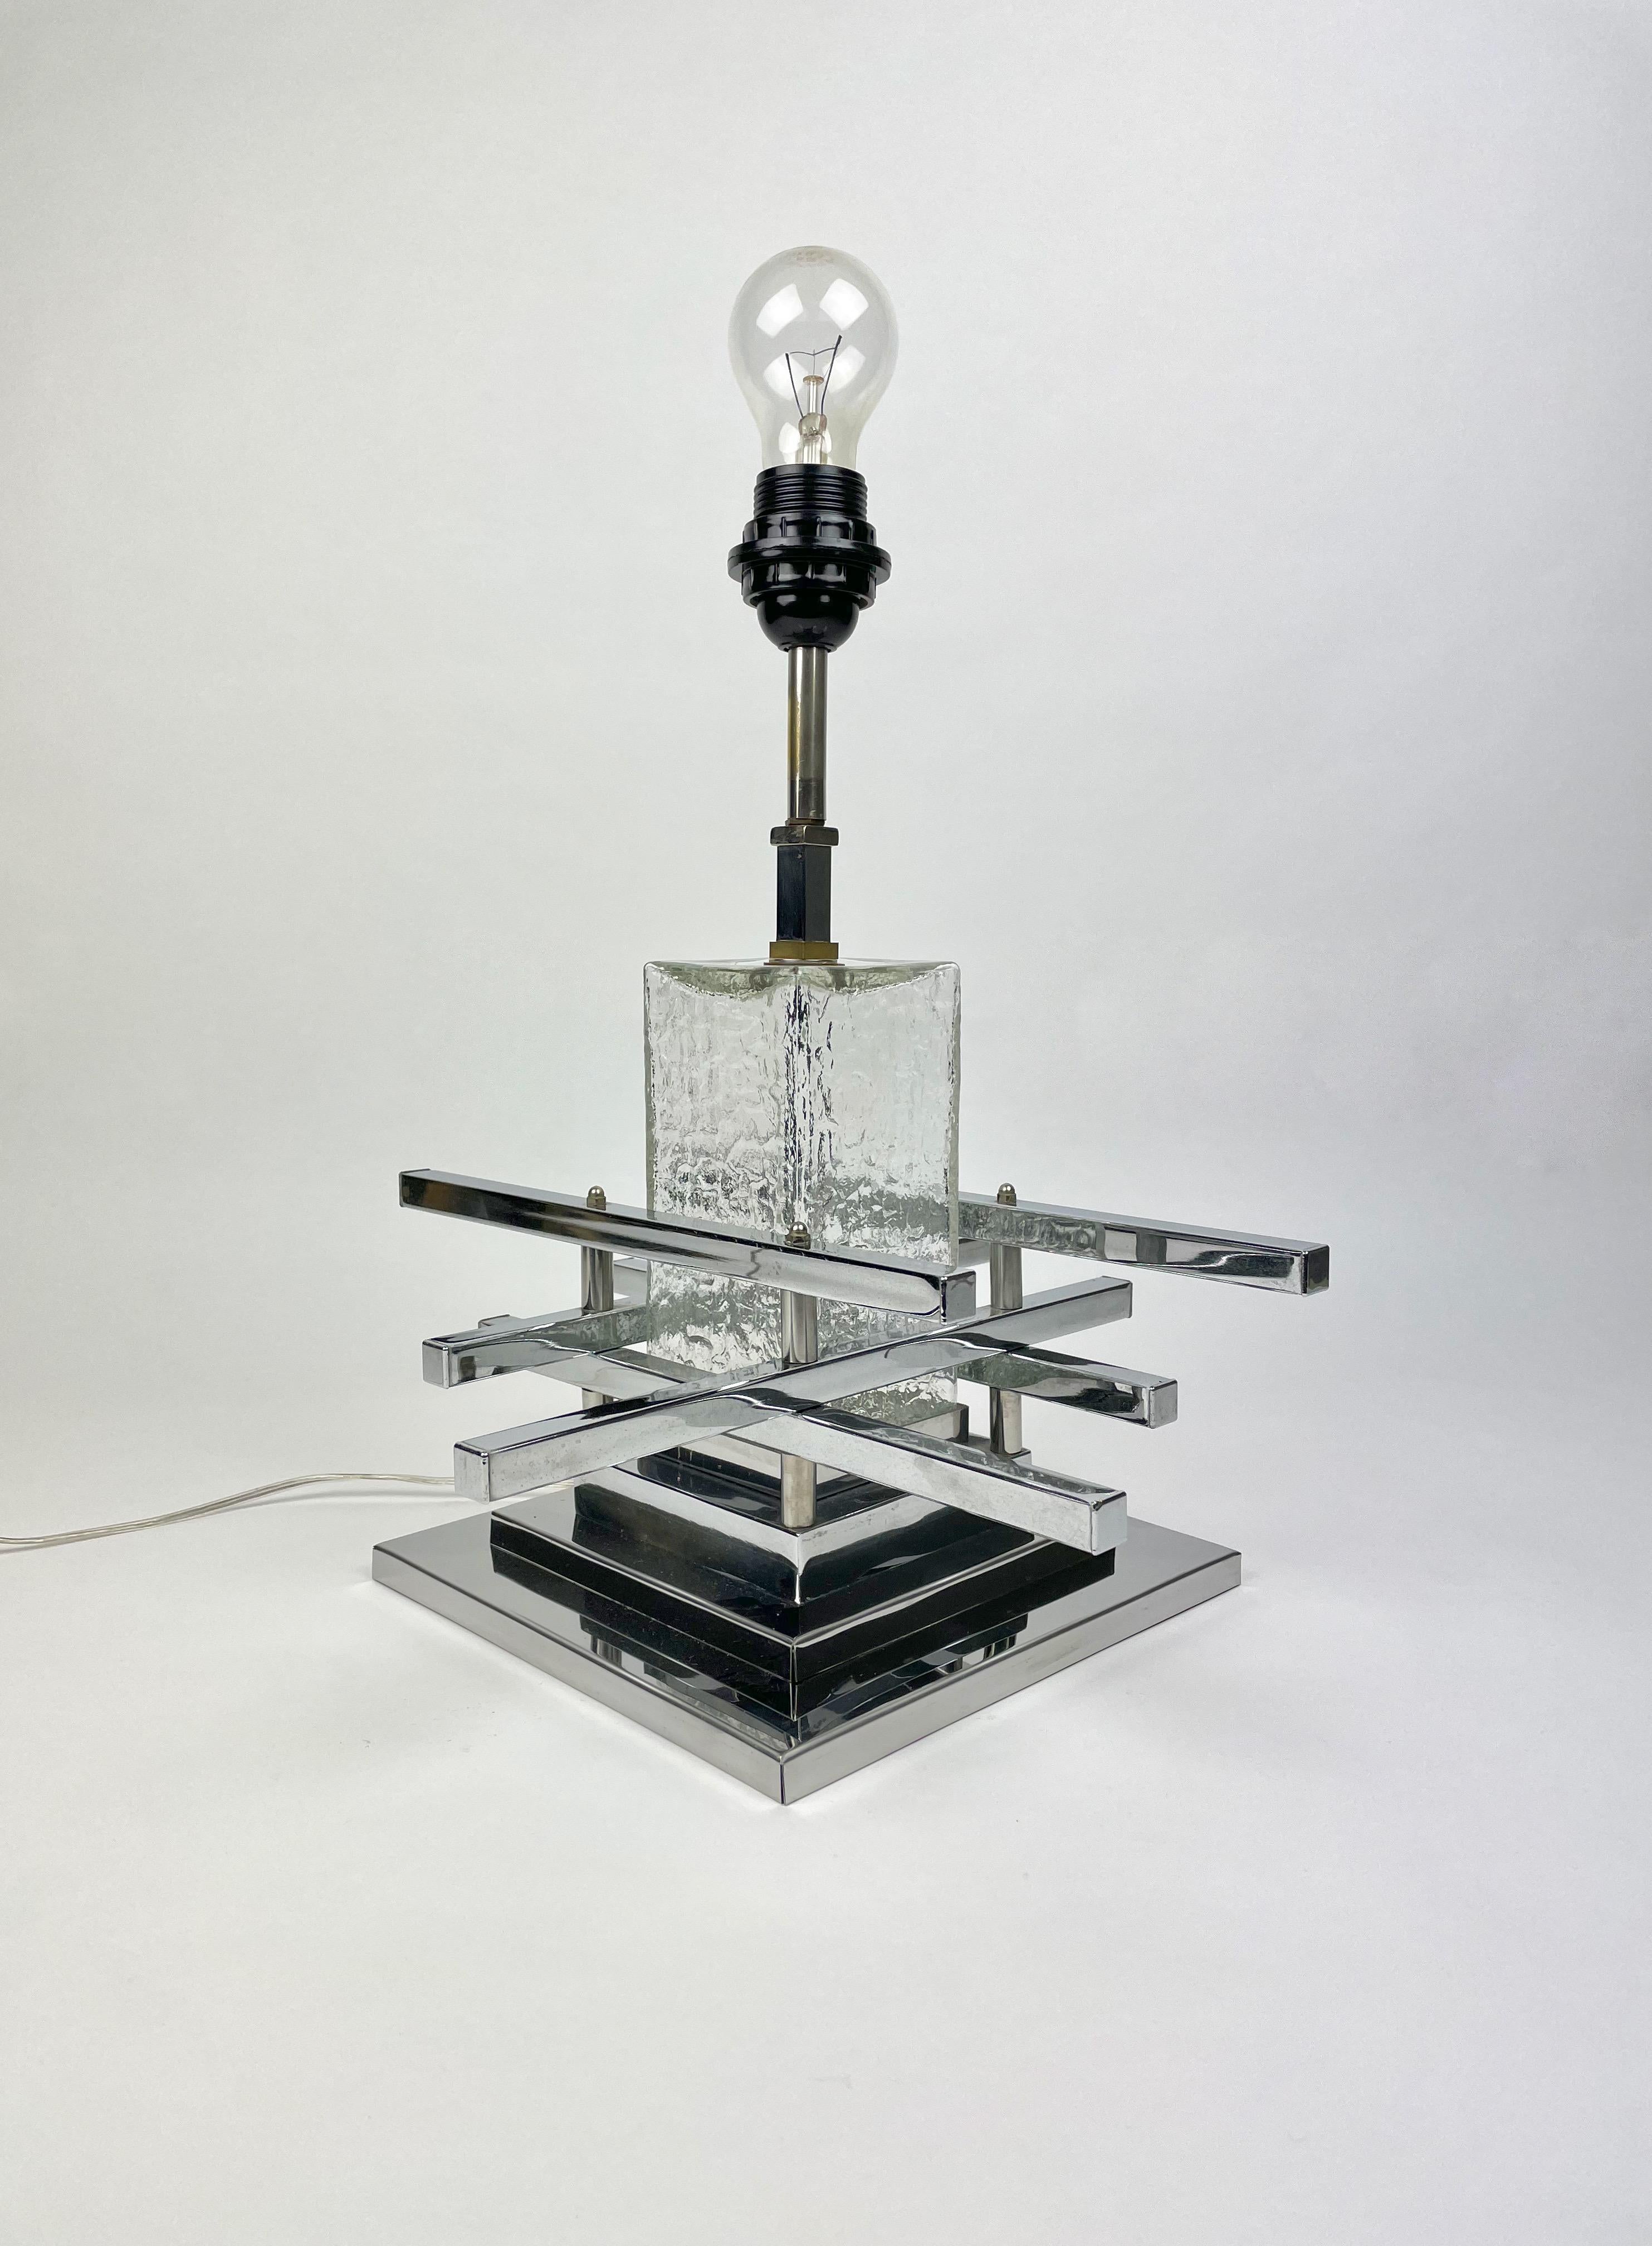 Metal Sciolari Table Lamp Metric Chrome and Glass, Italy, 1970s For Sale